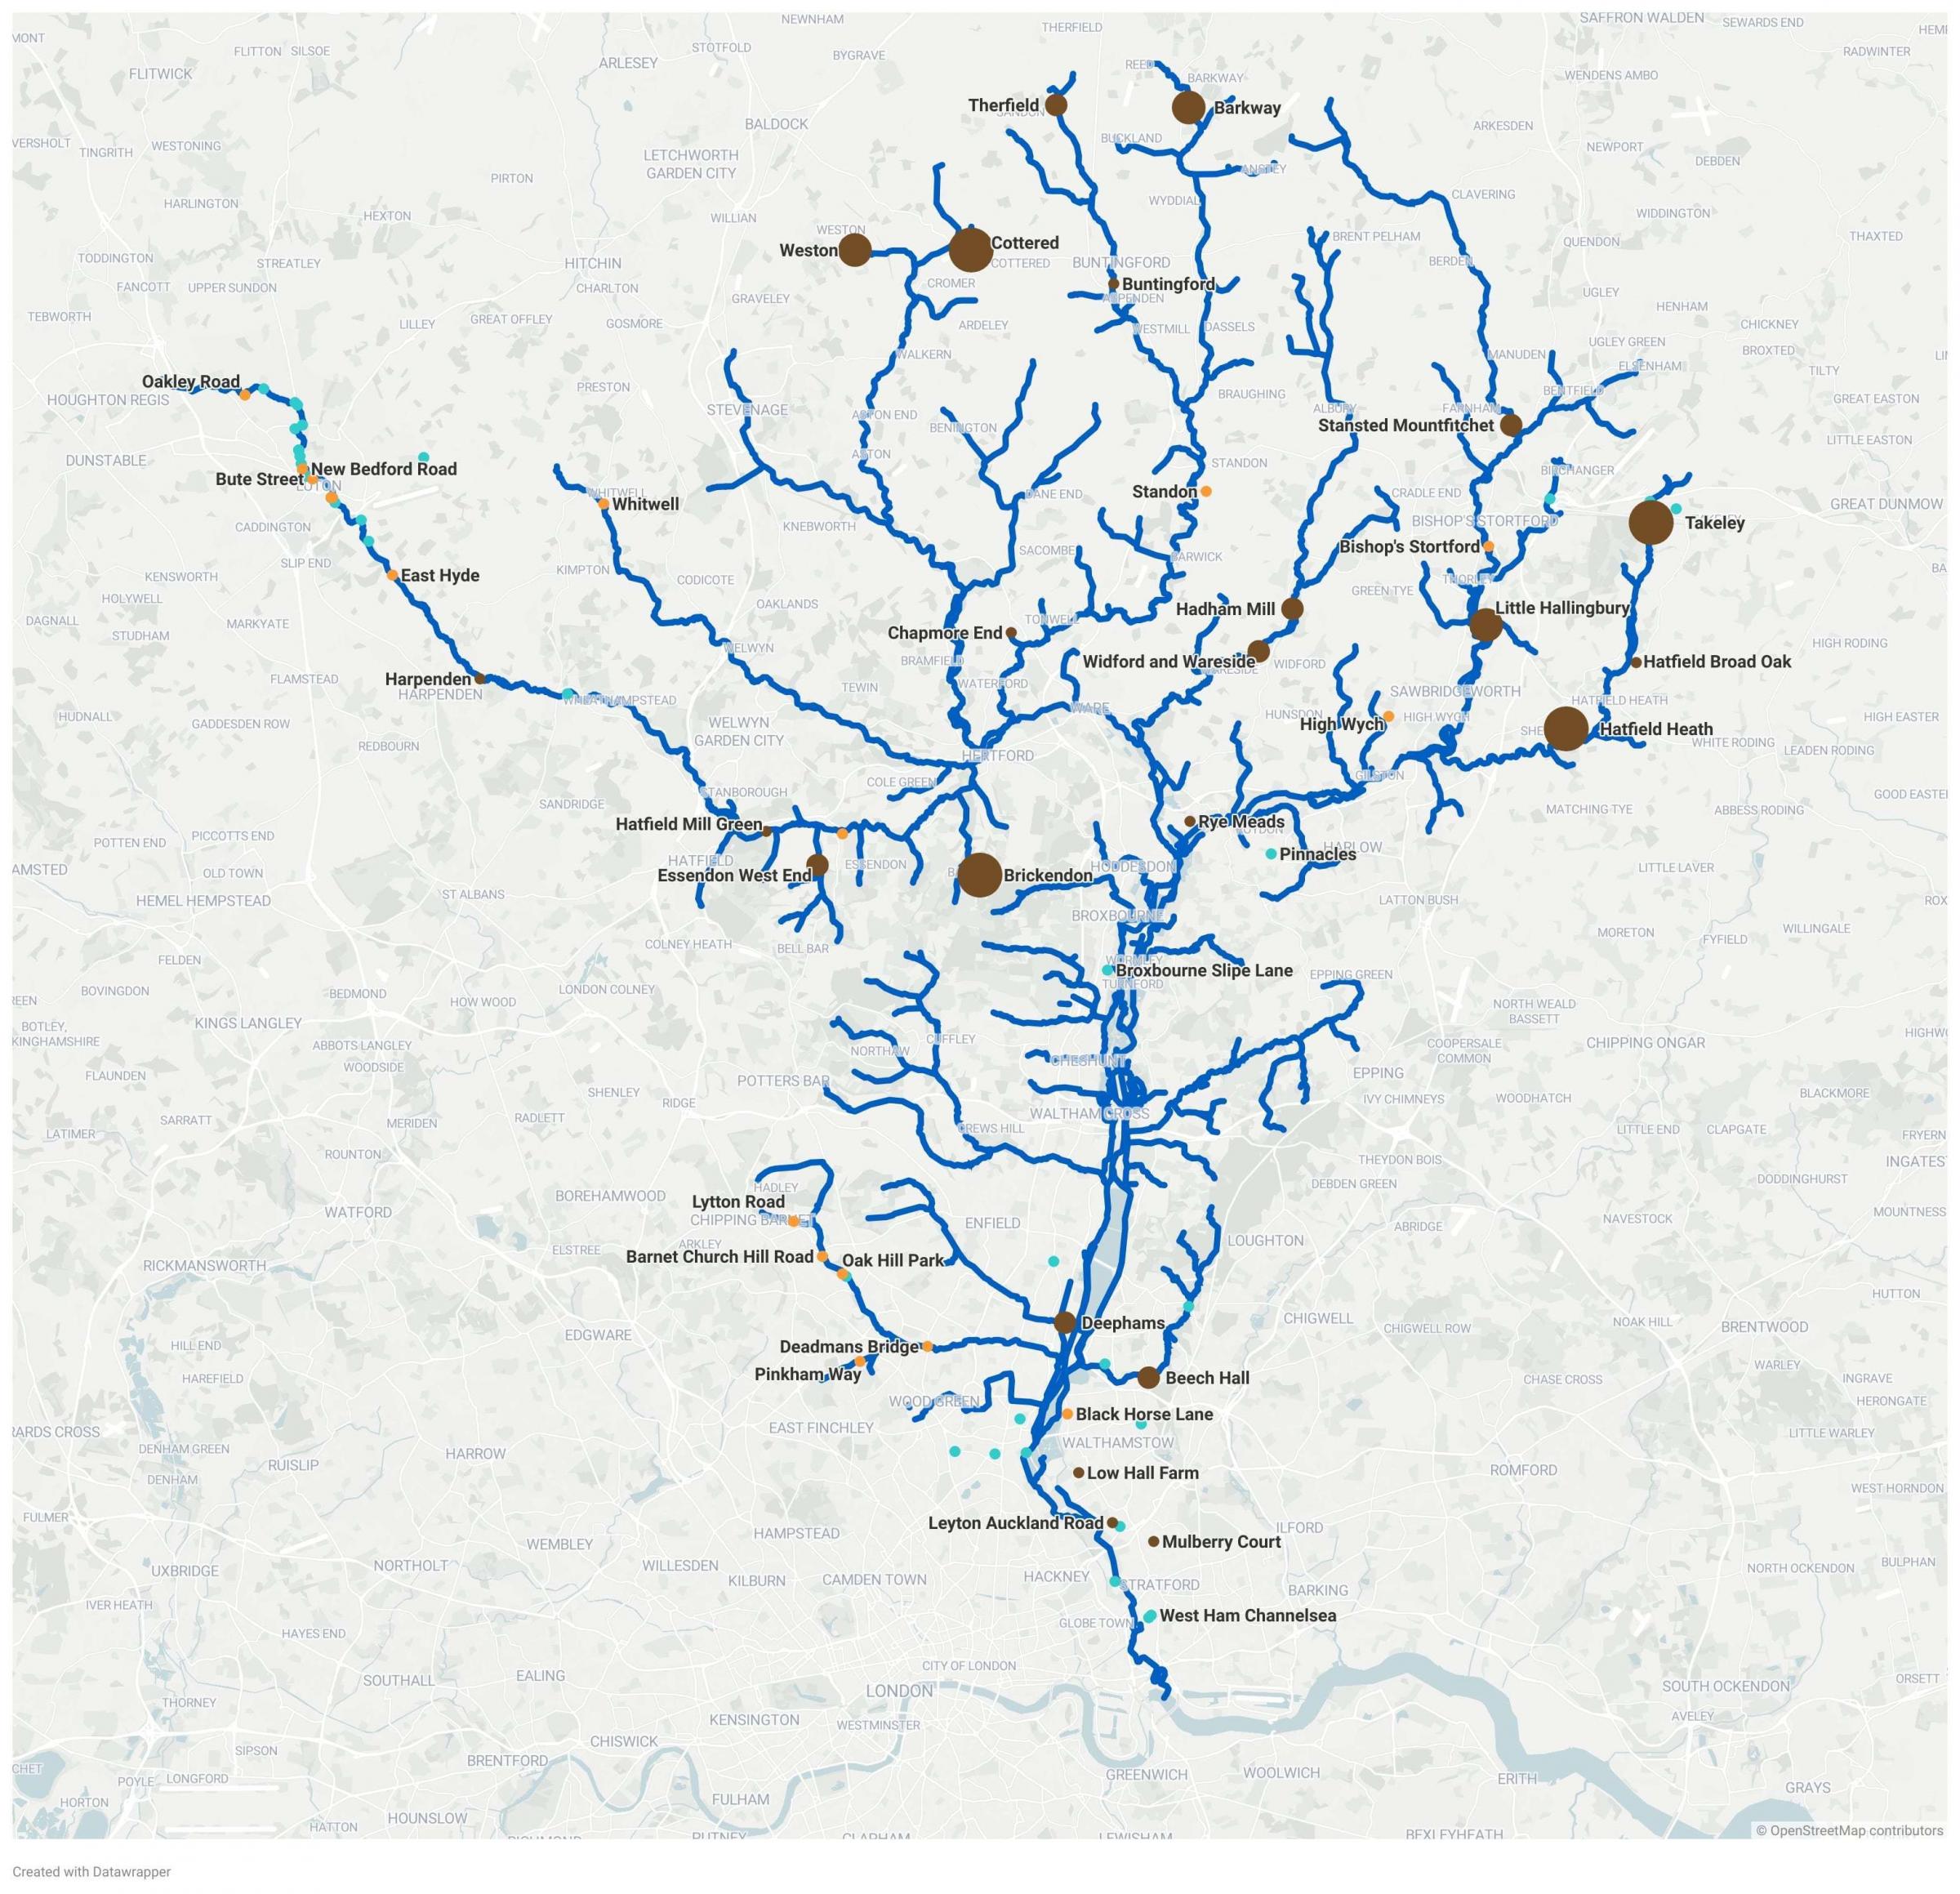 River Lee sewage discharge sites map. Credit: Environment Agency via Local Democracy Reporting Service, uses OS OpenData. Key: Brown - Discharge for more than one day; Orange - Discharge between 1-24 hours; Blue - Discharge less than one hour or none